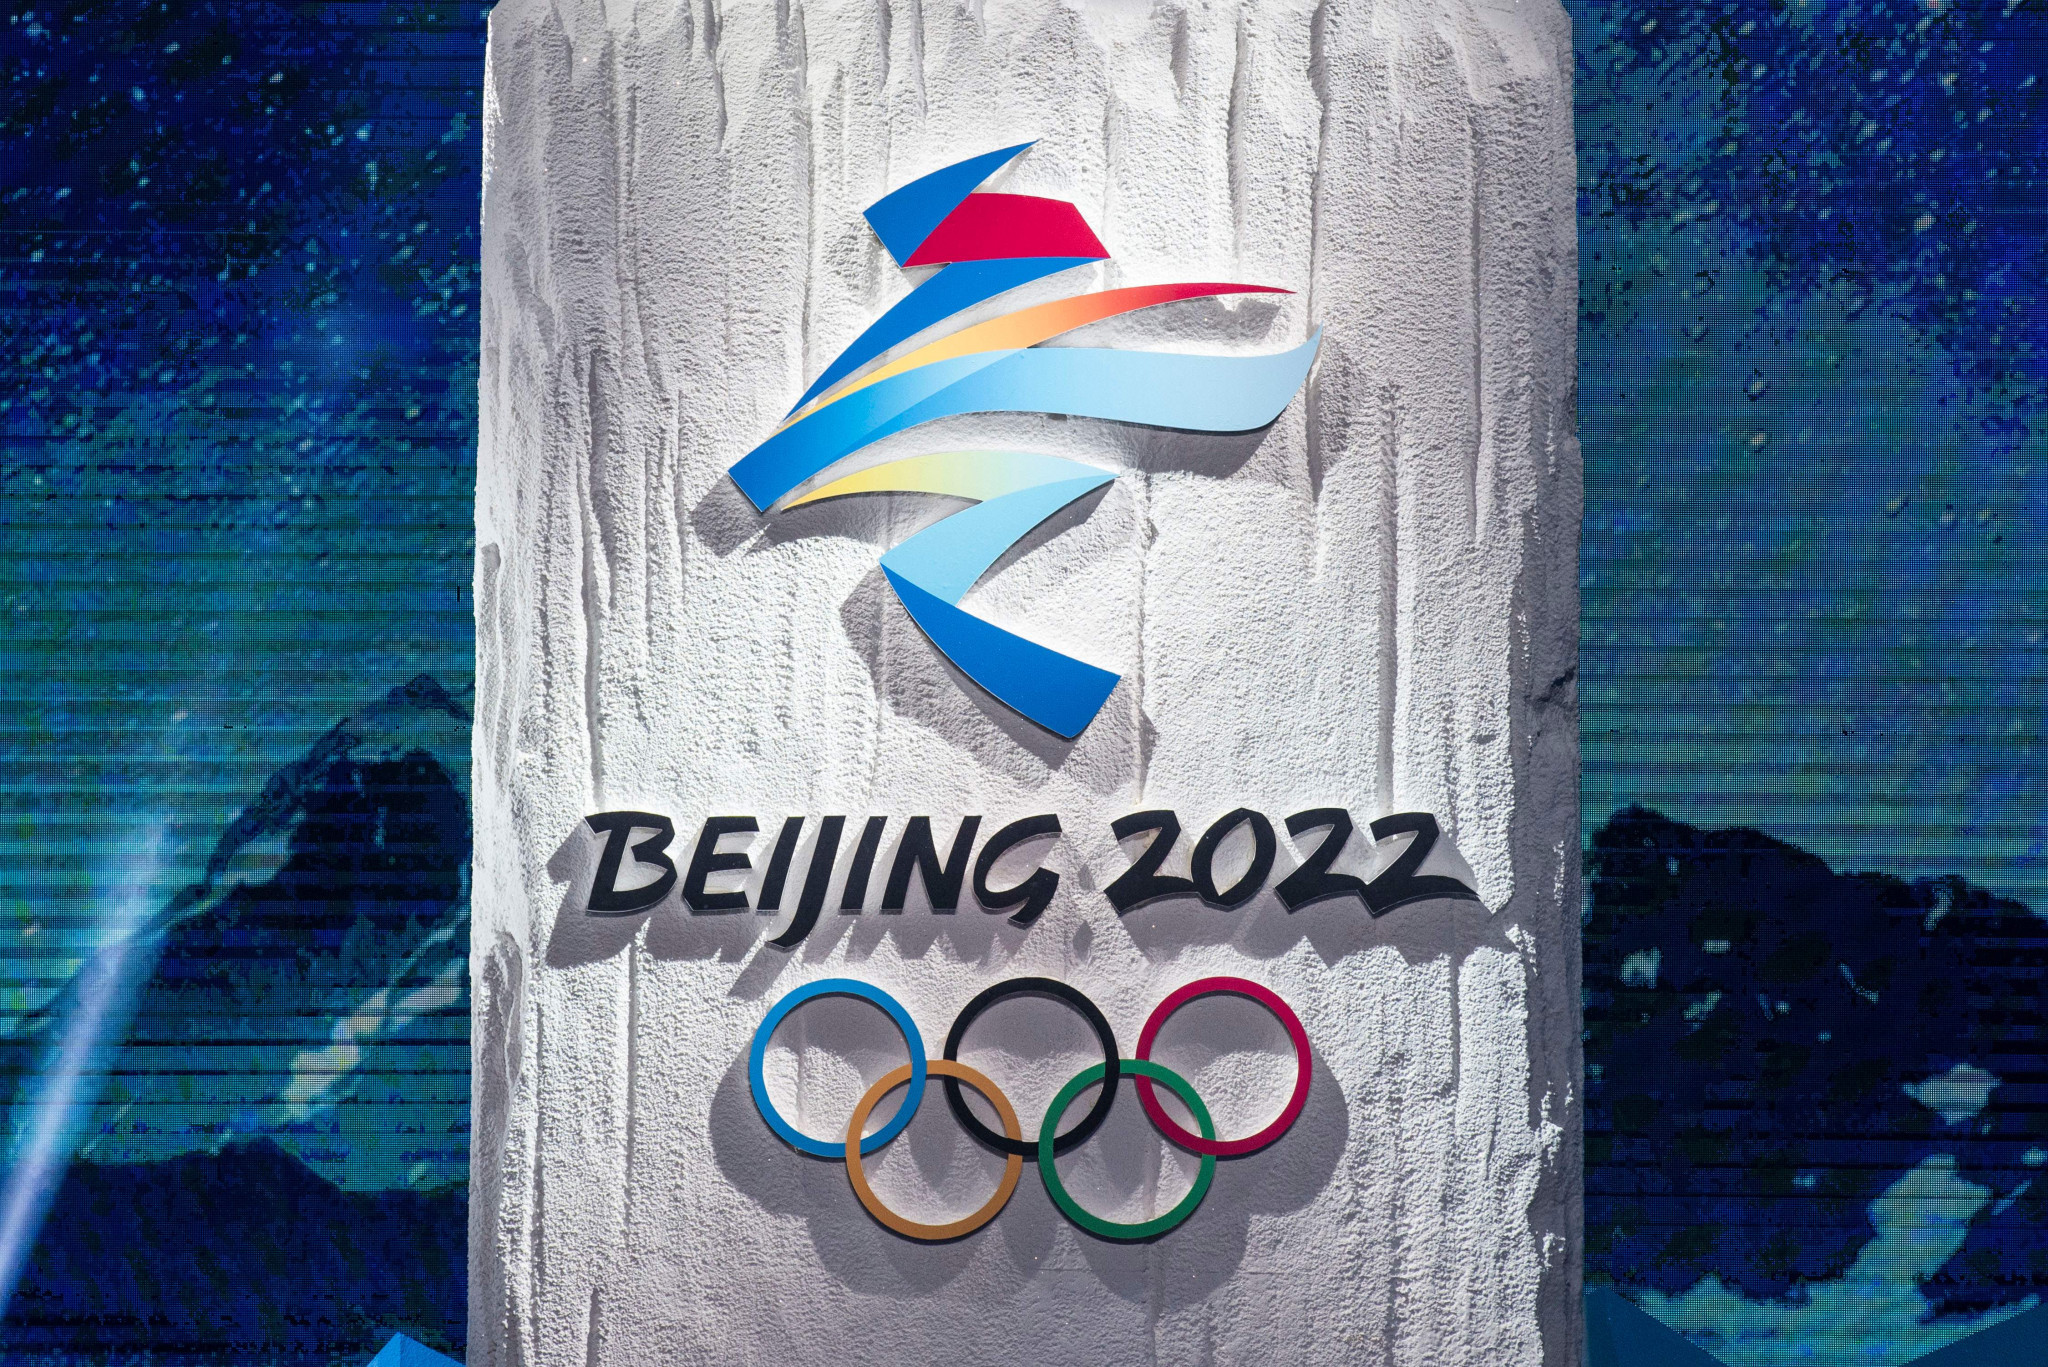 Beijing 2022 organisers concede some COVID-19 cases likely